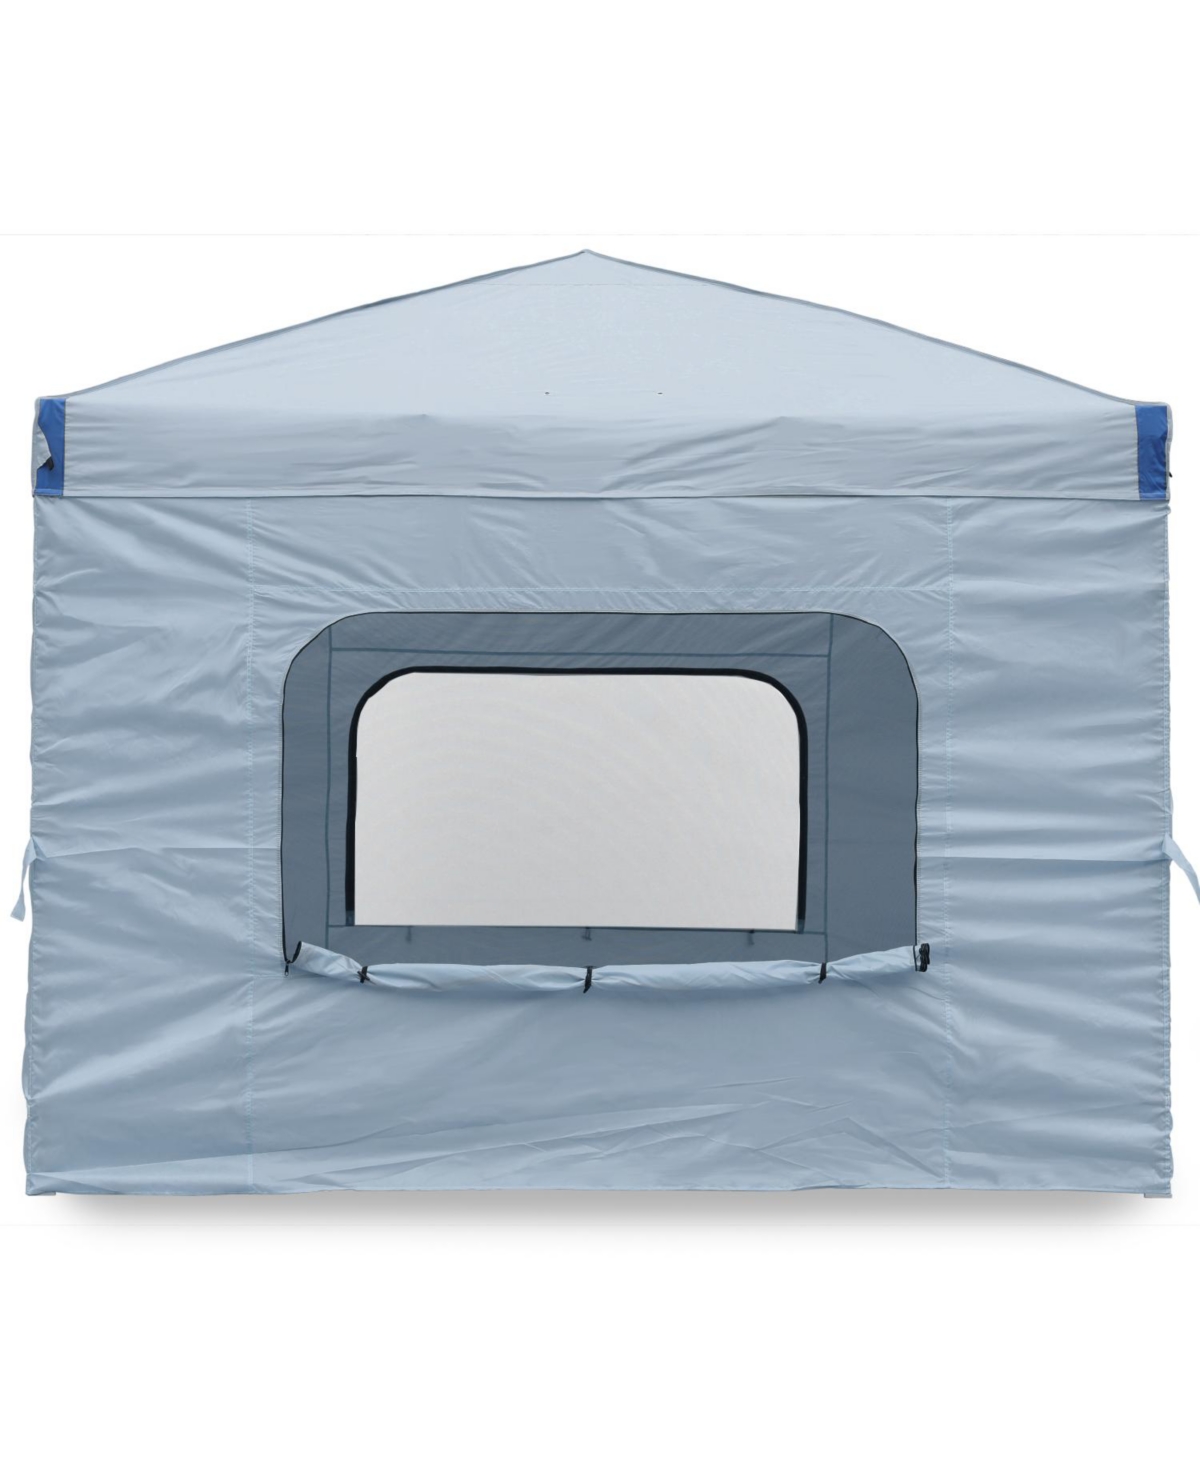 Canopy Sidewall Replacement with 2 Side Zipper and Windows for 10' x 10''Pop Up Canopy Tent (Sidewall Only) - Grey